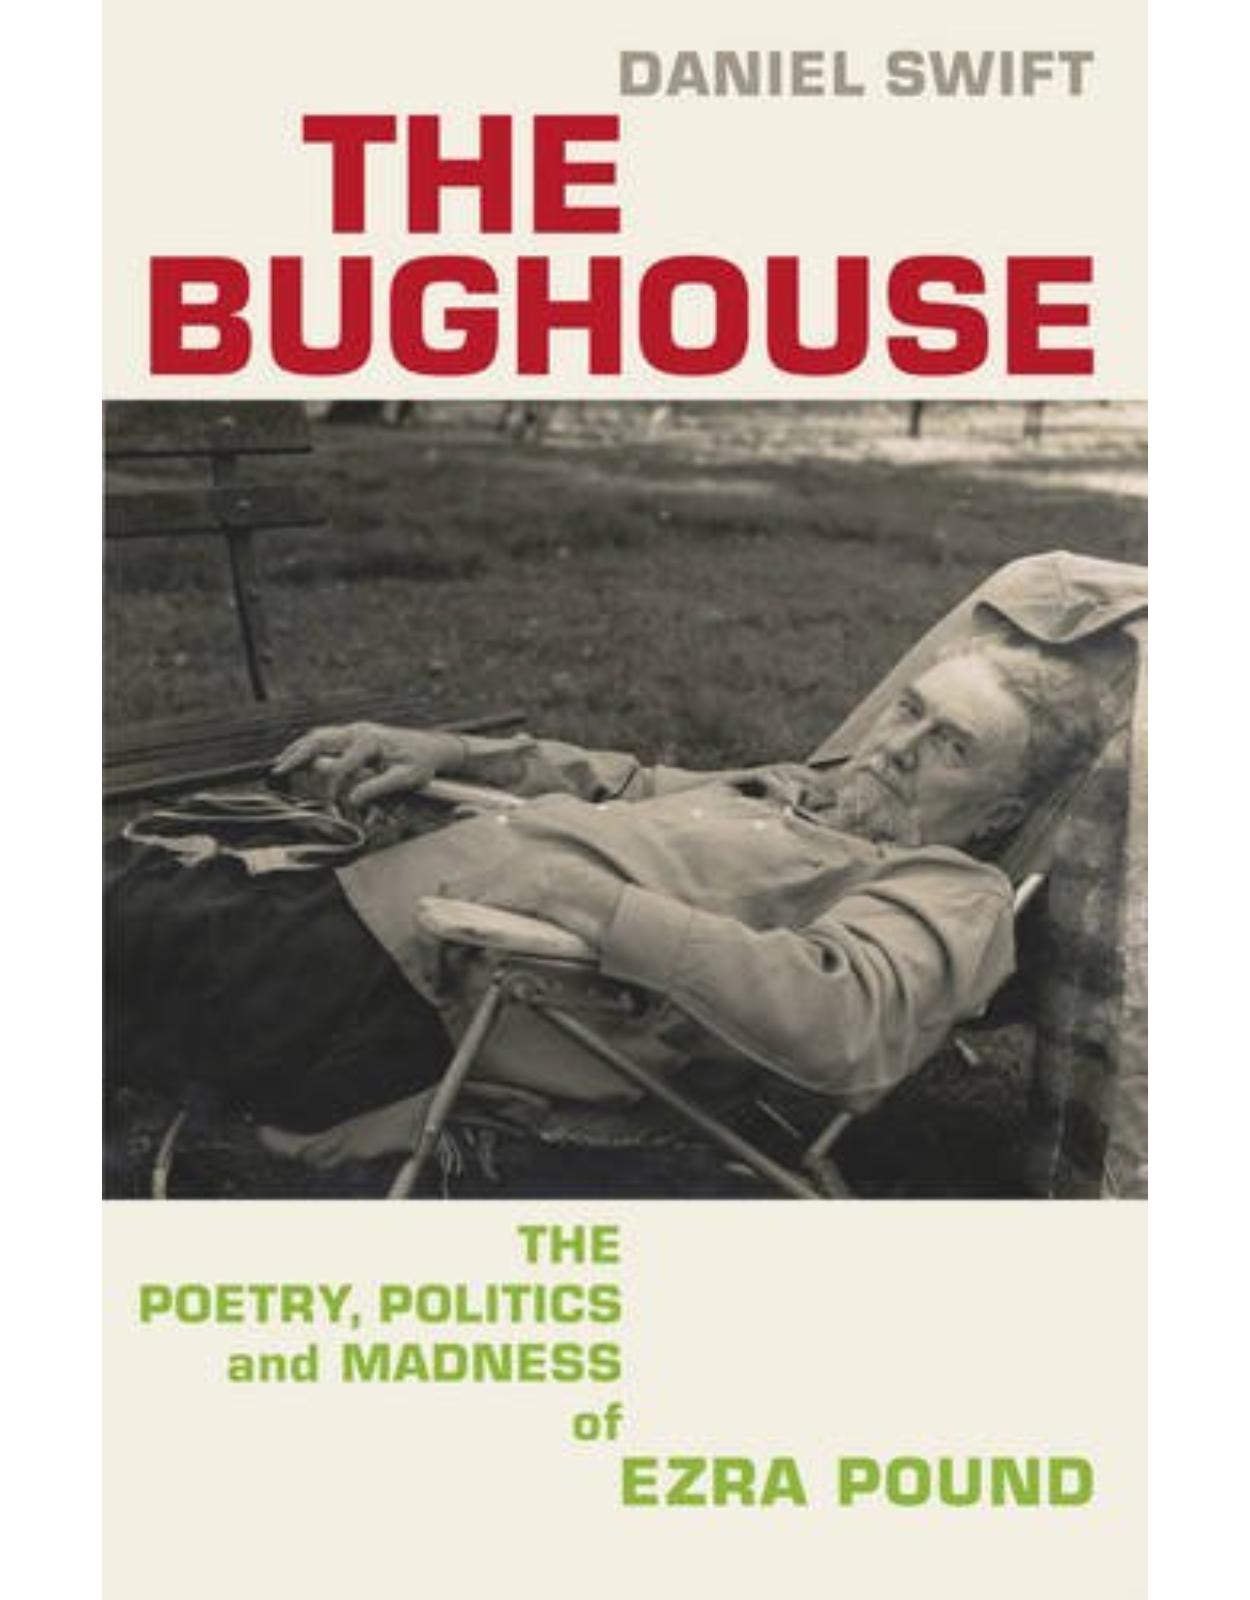 The Bughouse: The poetry, politics and madness of Ezra Pound